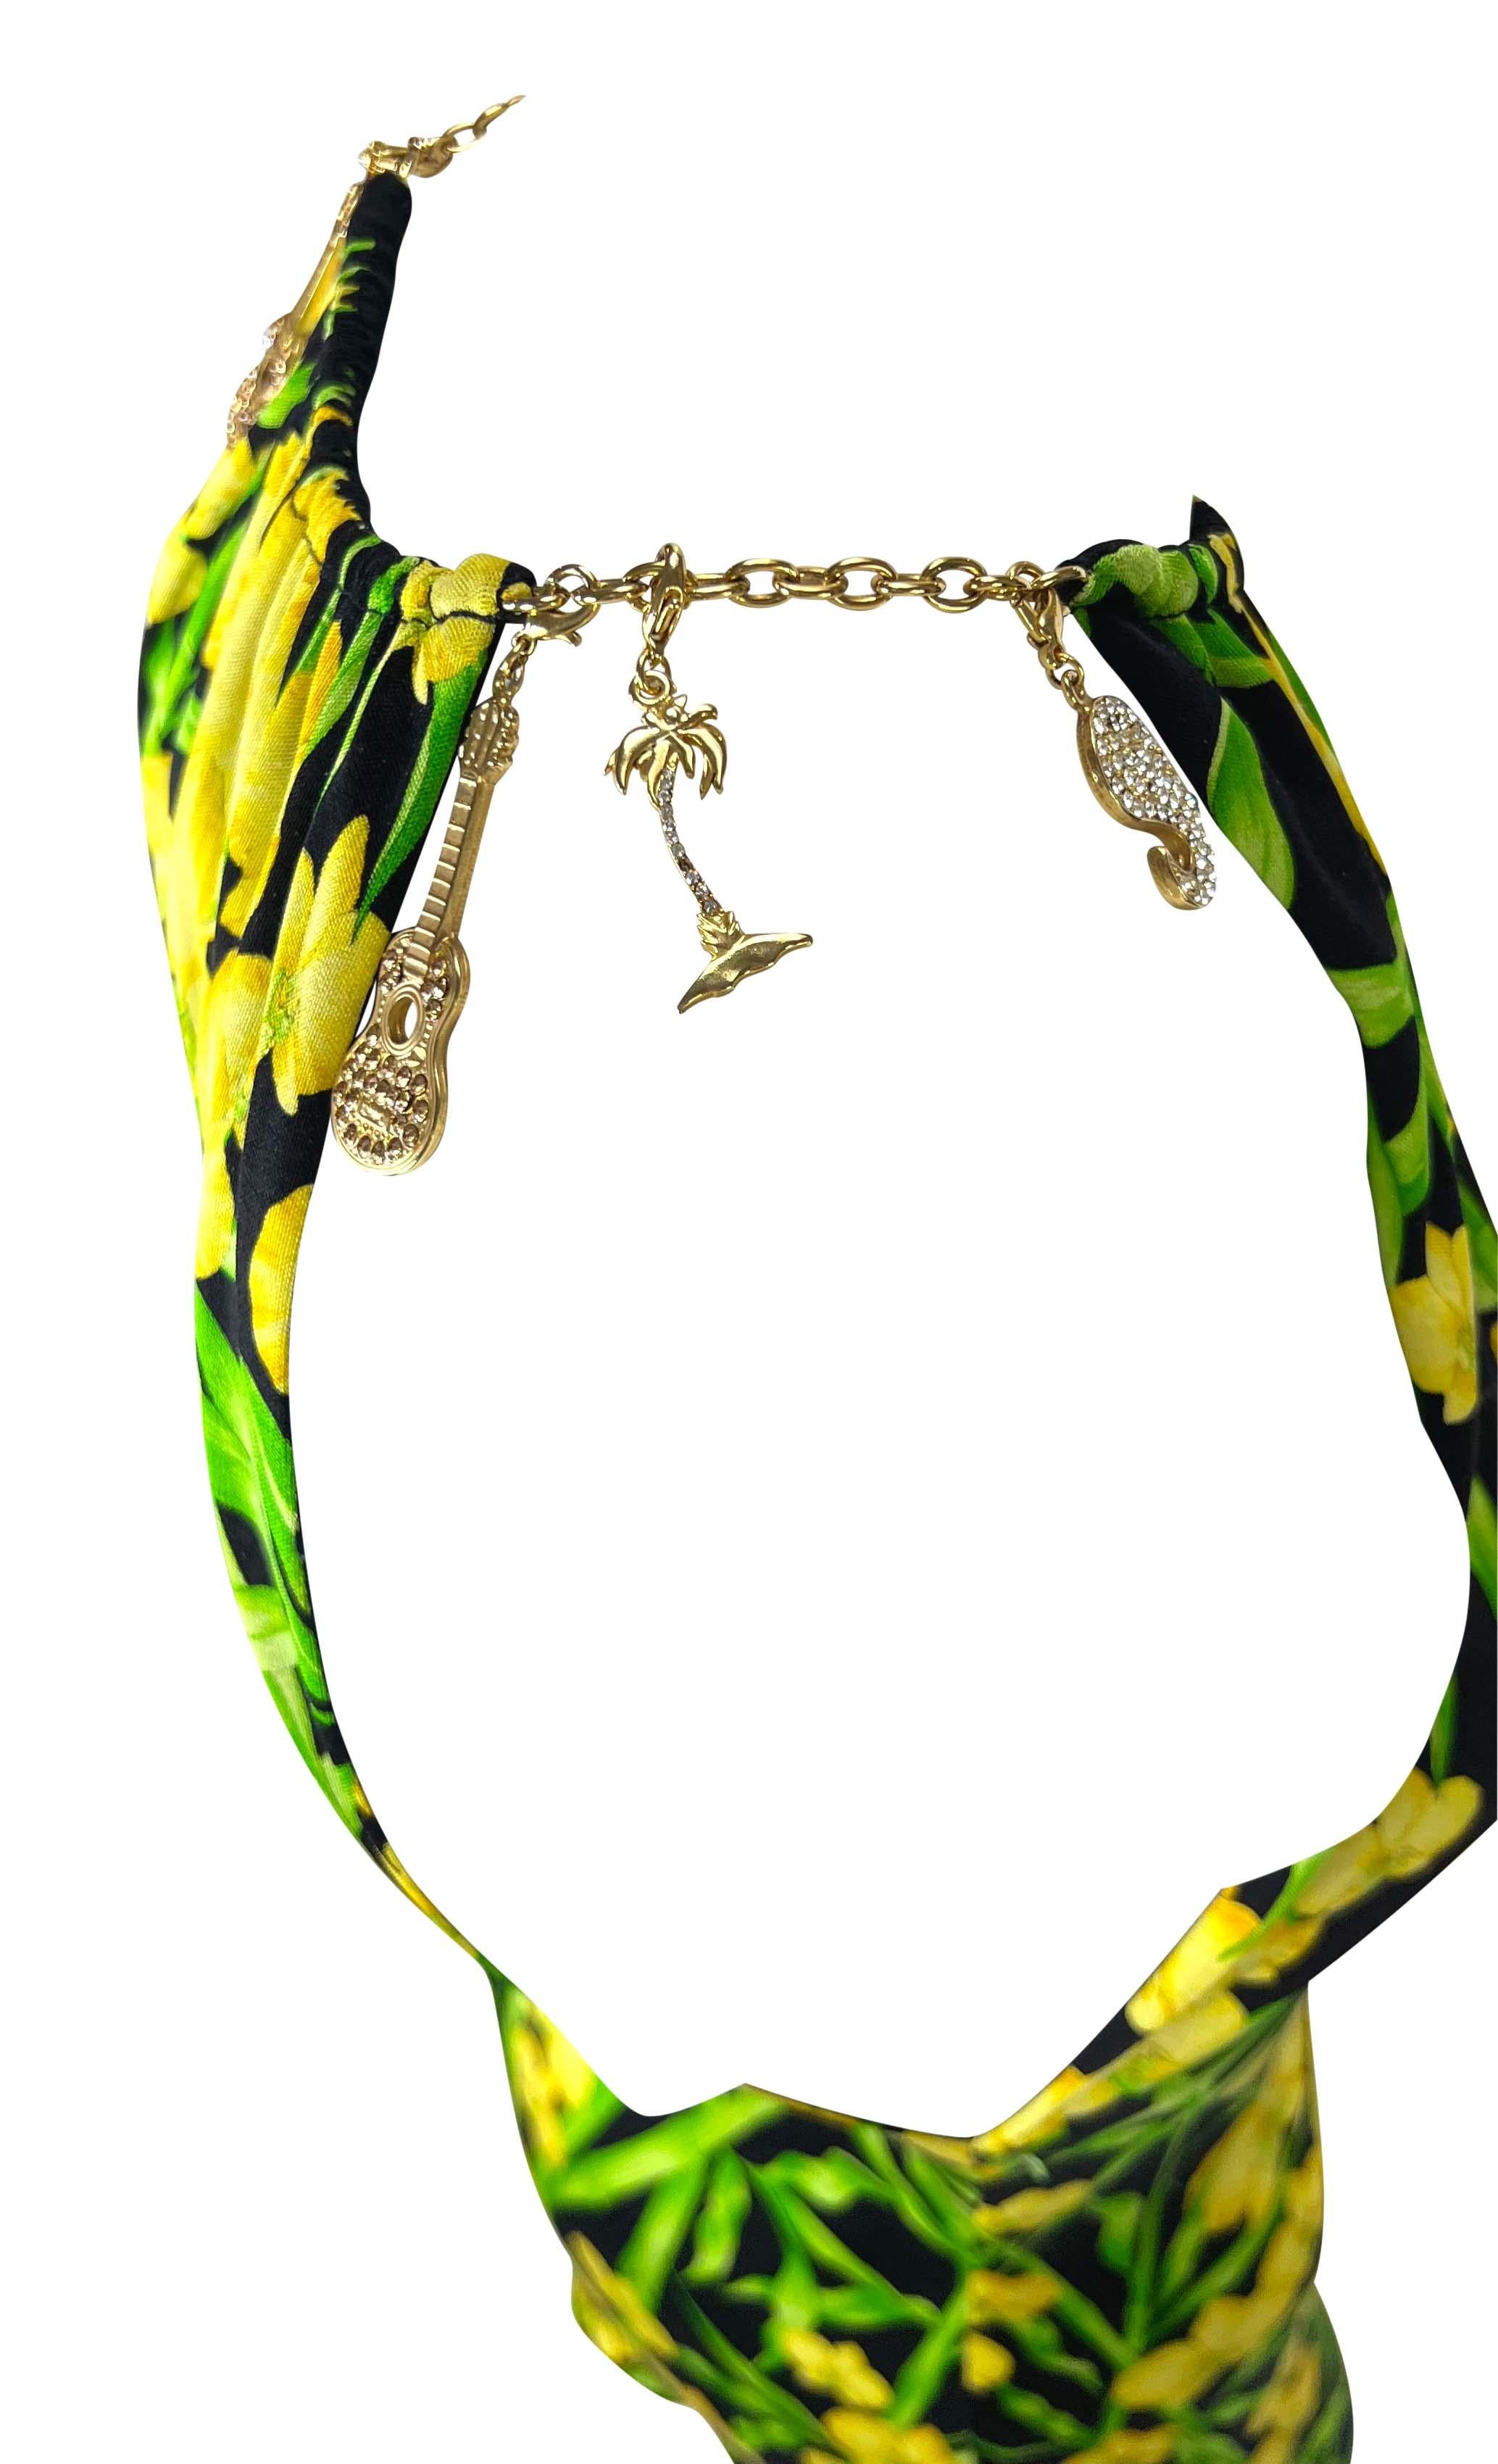 Women's S/S 2000 Gianni Versace by Donatella Jungle Yellow Orchid Stretch Charm Dress For Sale